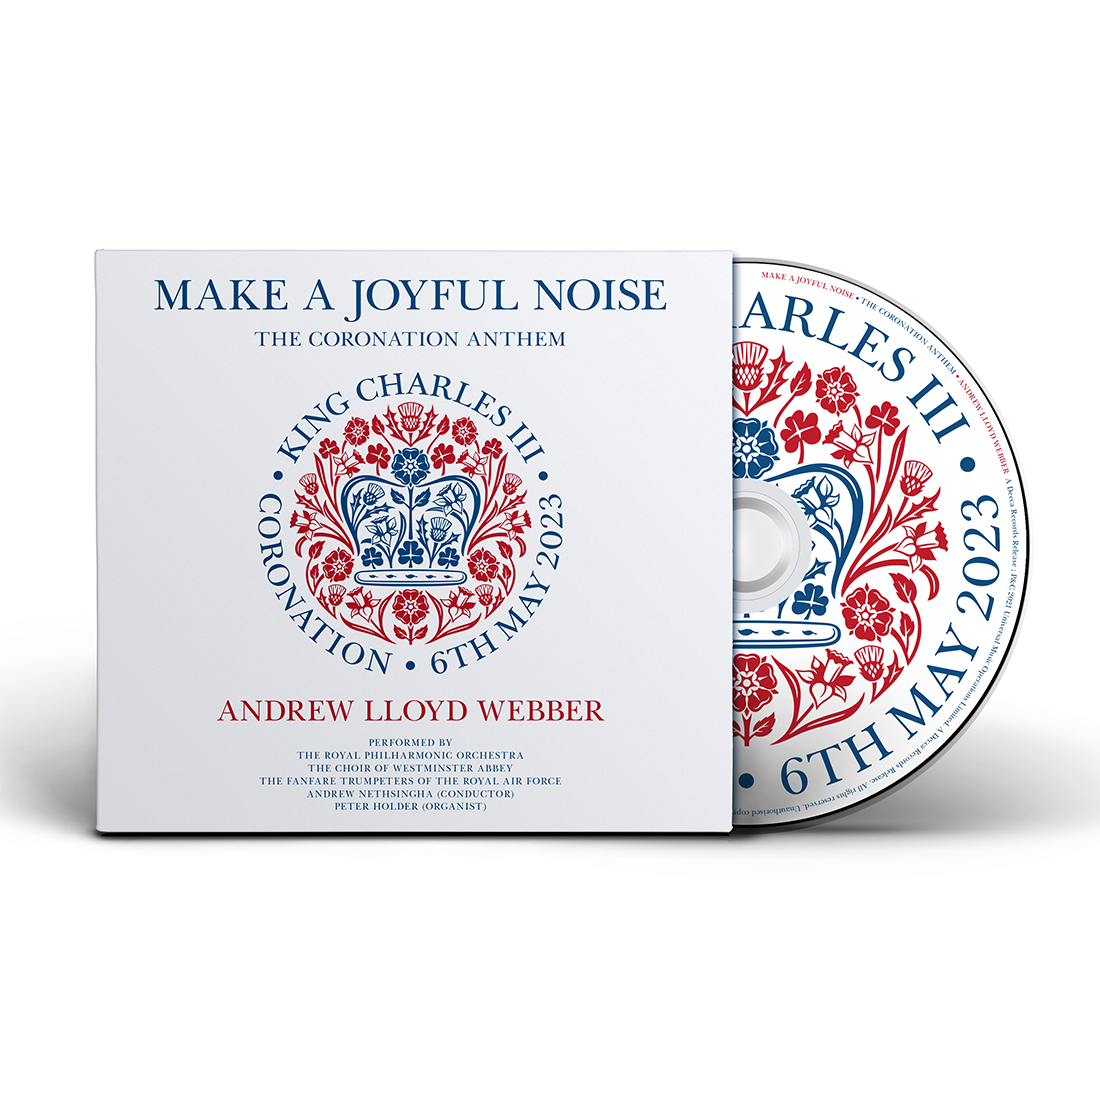 Andrew Lloyd Webber, Royal Philharmonic Orchestra, The Choir Of Westminster Abbey, Fanfare Trumpeters Of The Royal Air Force - Make a Joyful Noise - Andrew Lloyd Webber